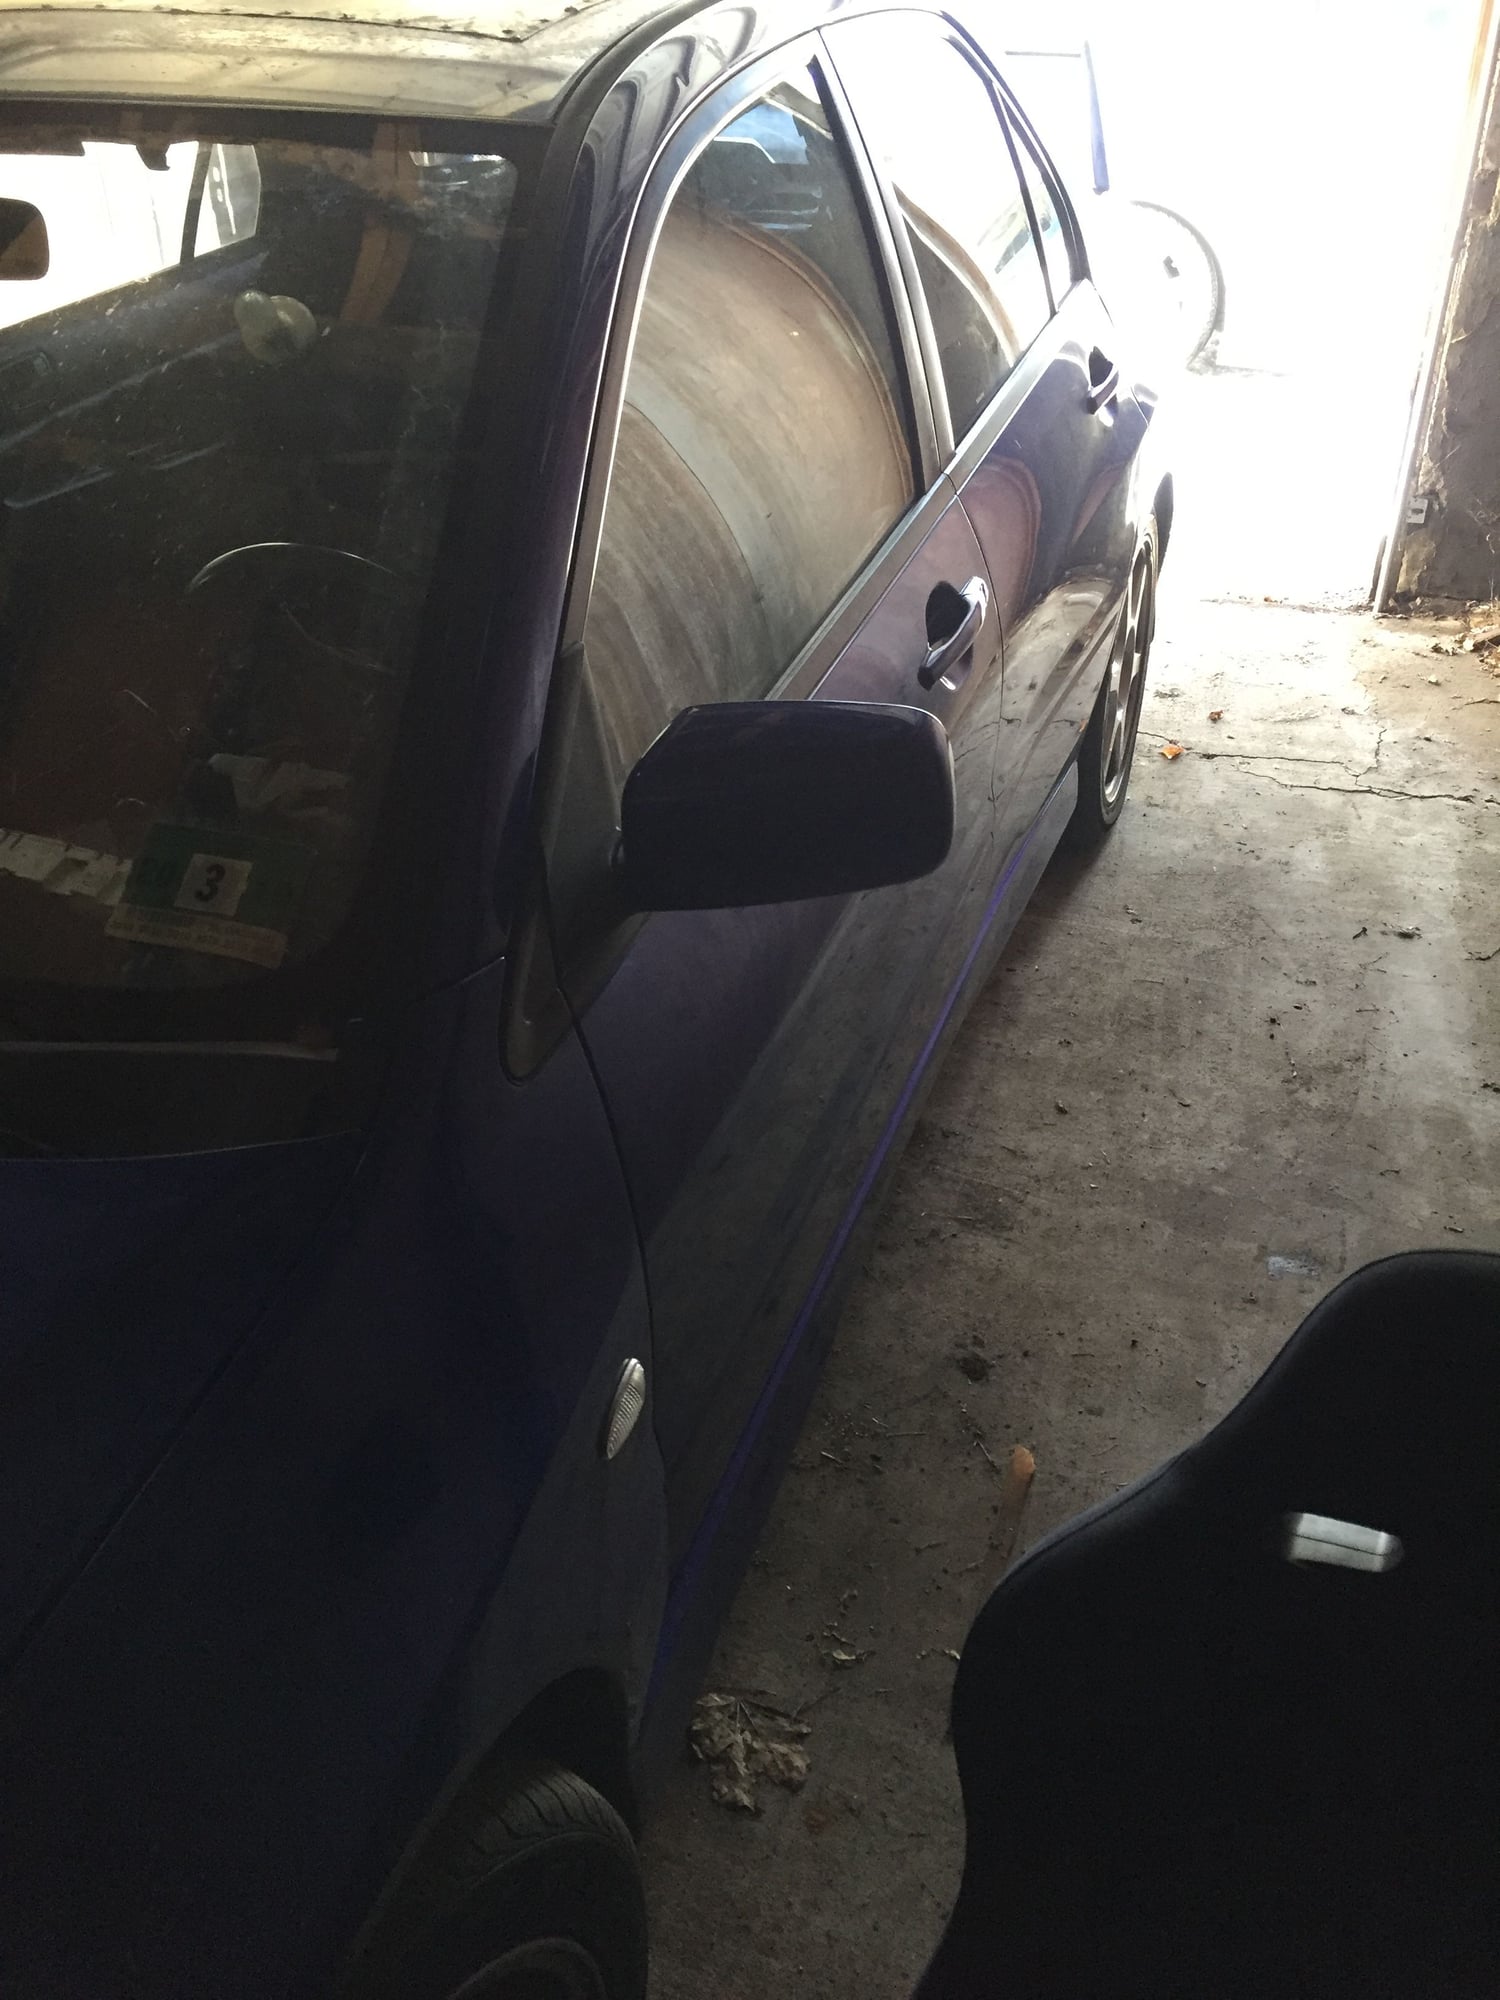 2005 Mitsubishi Lancer Evolution - Evo 8 roller ton of parts engines, trans, new parts just need Alittle to get motor in - Used - VIN Ja3ah86d85u044896 - 116,000 Miles - 4 cyl - AWD - Manual - Sedan - Blue - Hackettstown, NJ 07840, United States